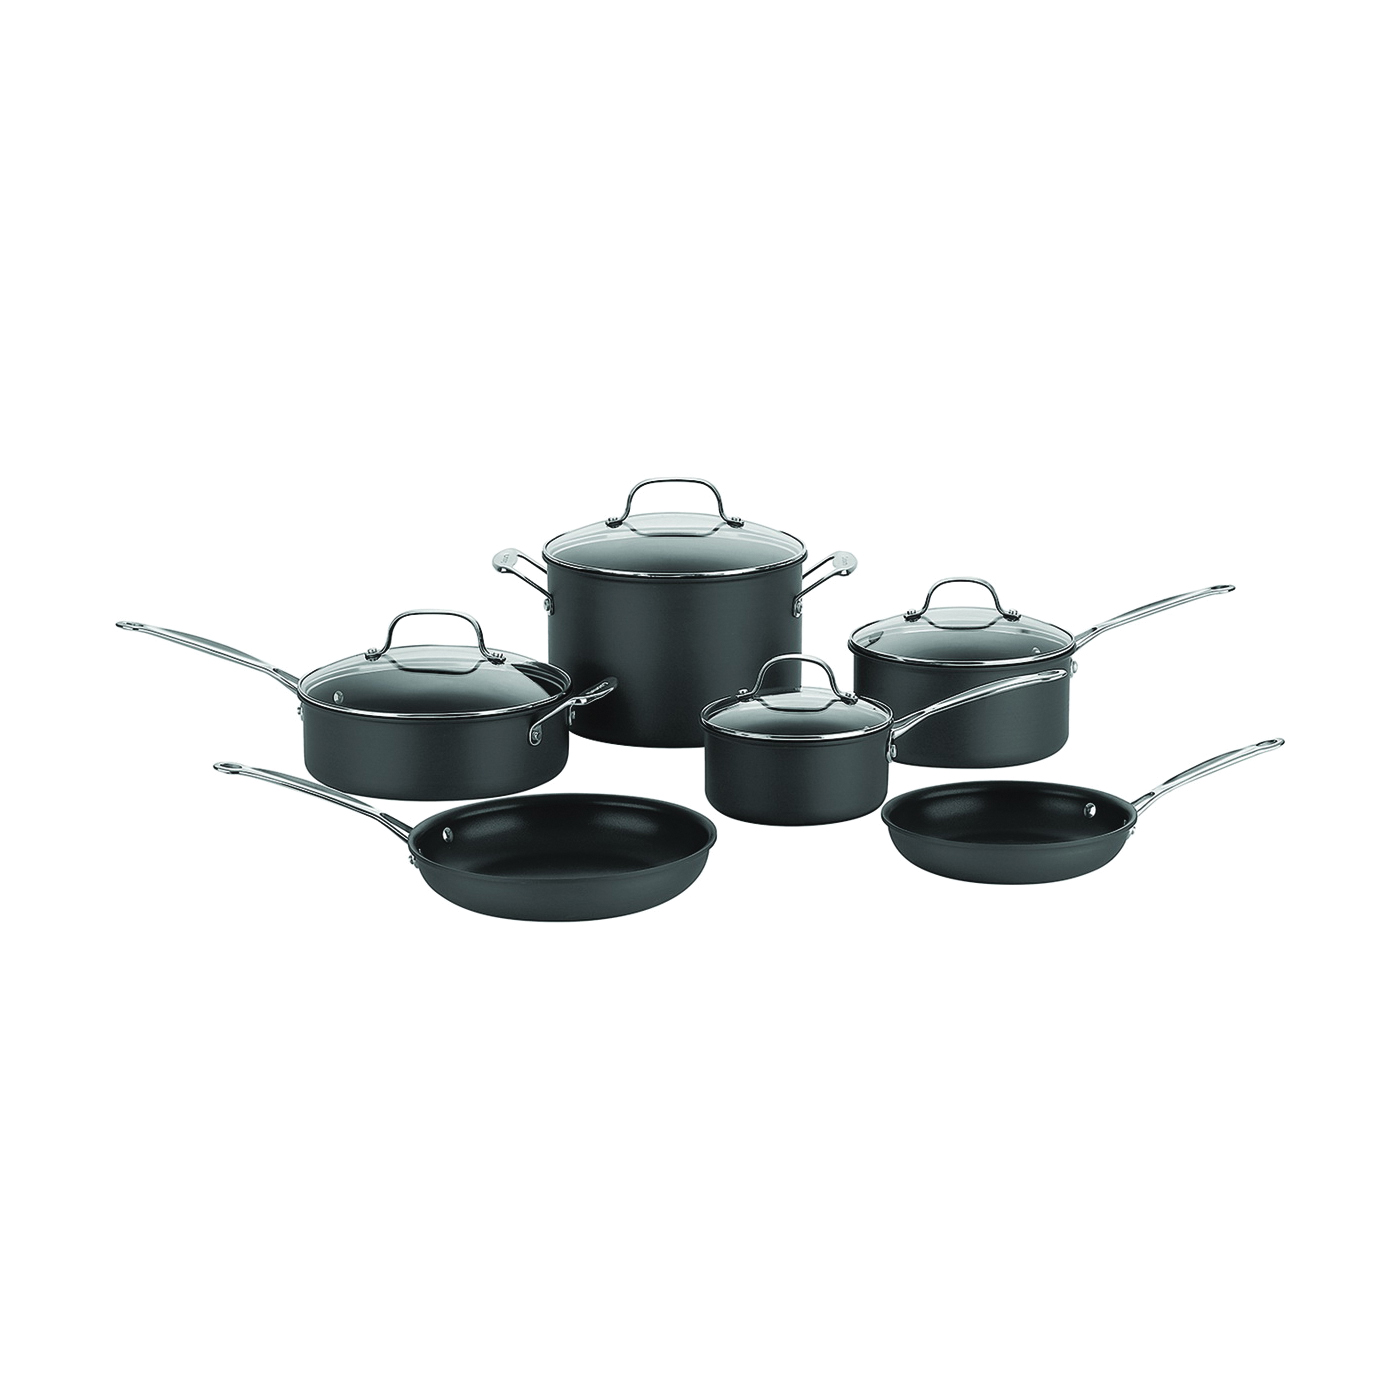 Chef's Classic 66-10 Cookware Set, 10-Piece